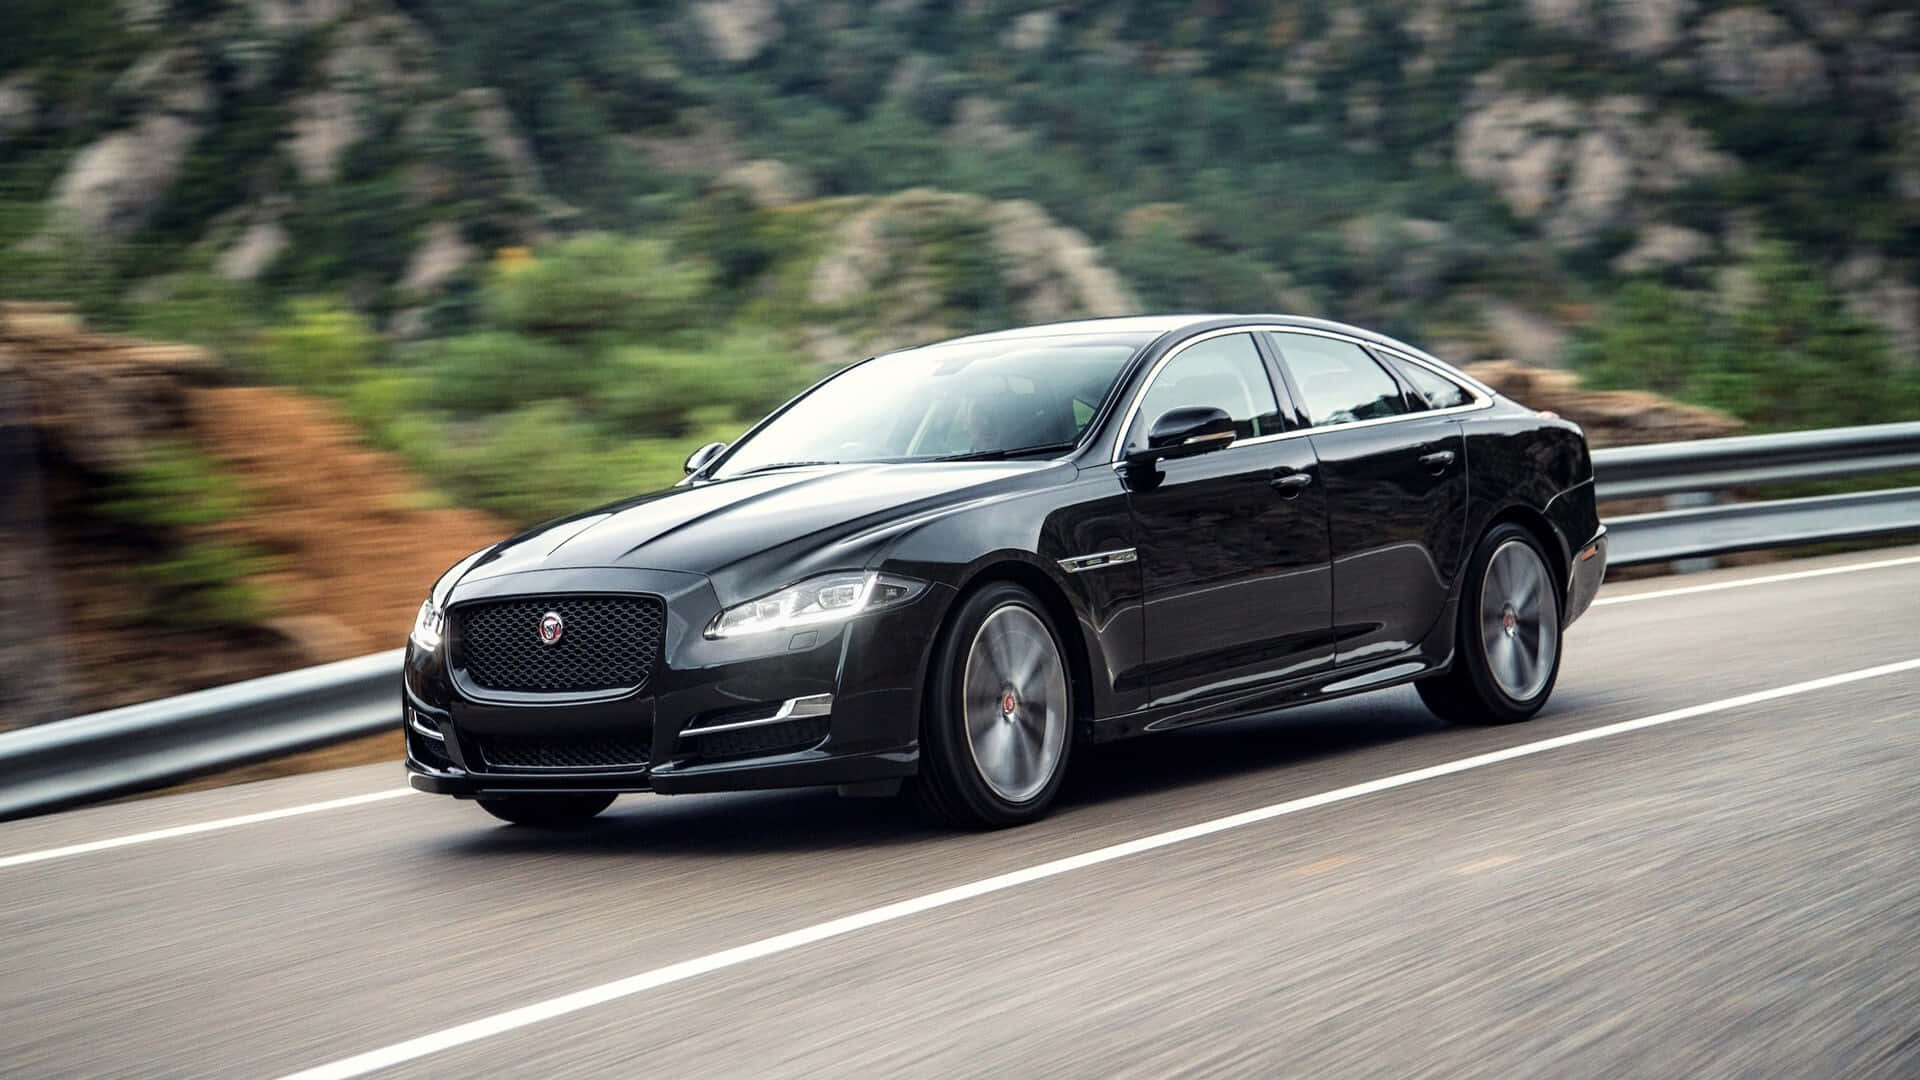 The Black Jaguar Xf Is Driving Down A Mountain Road